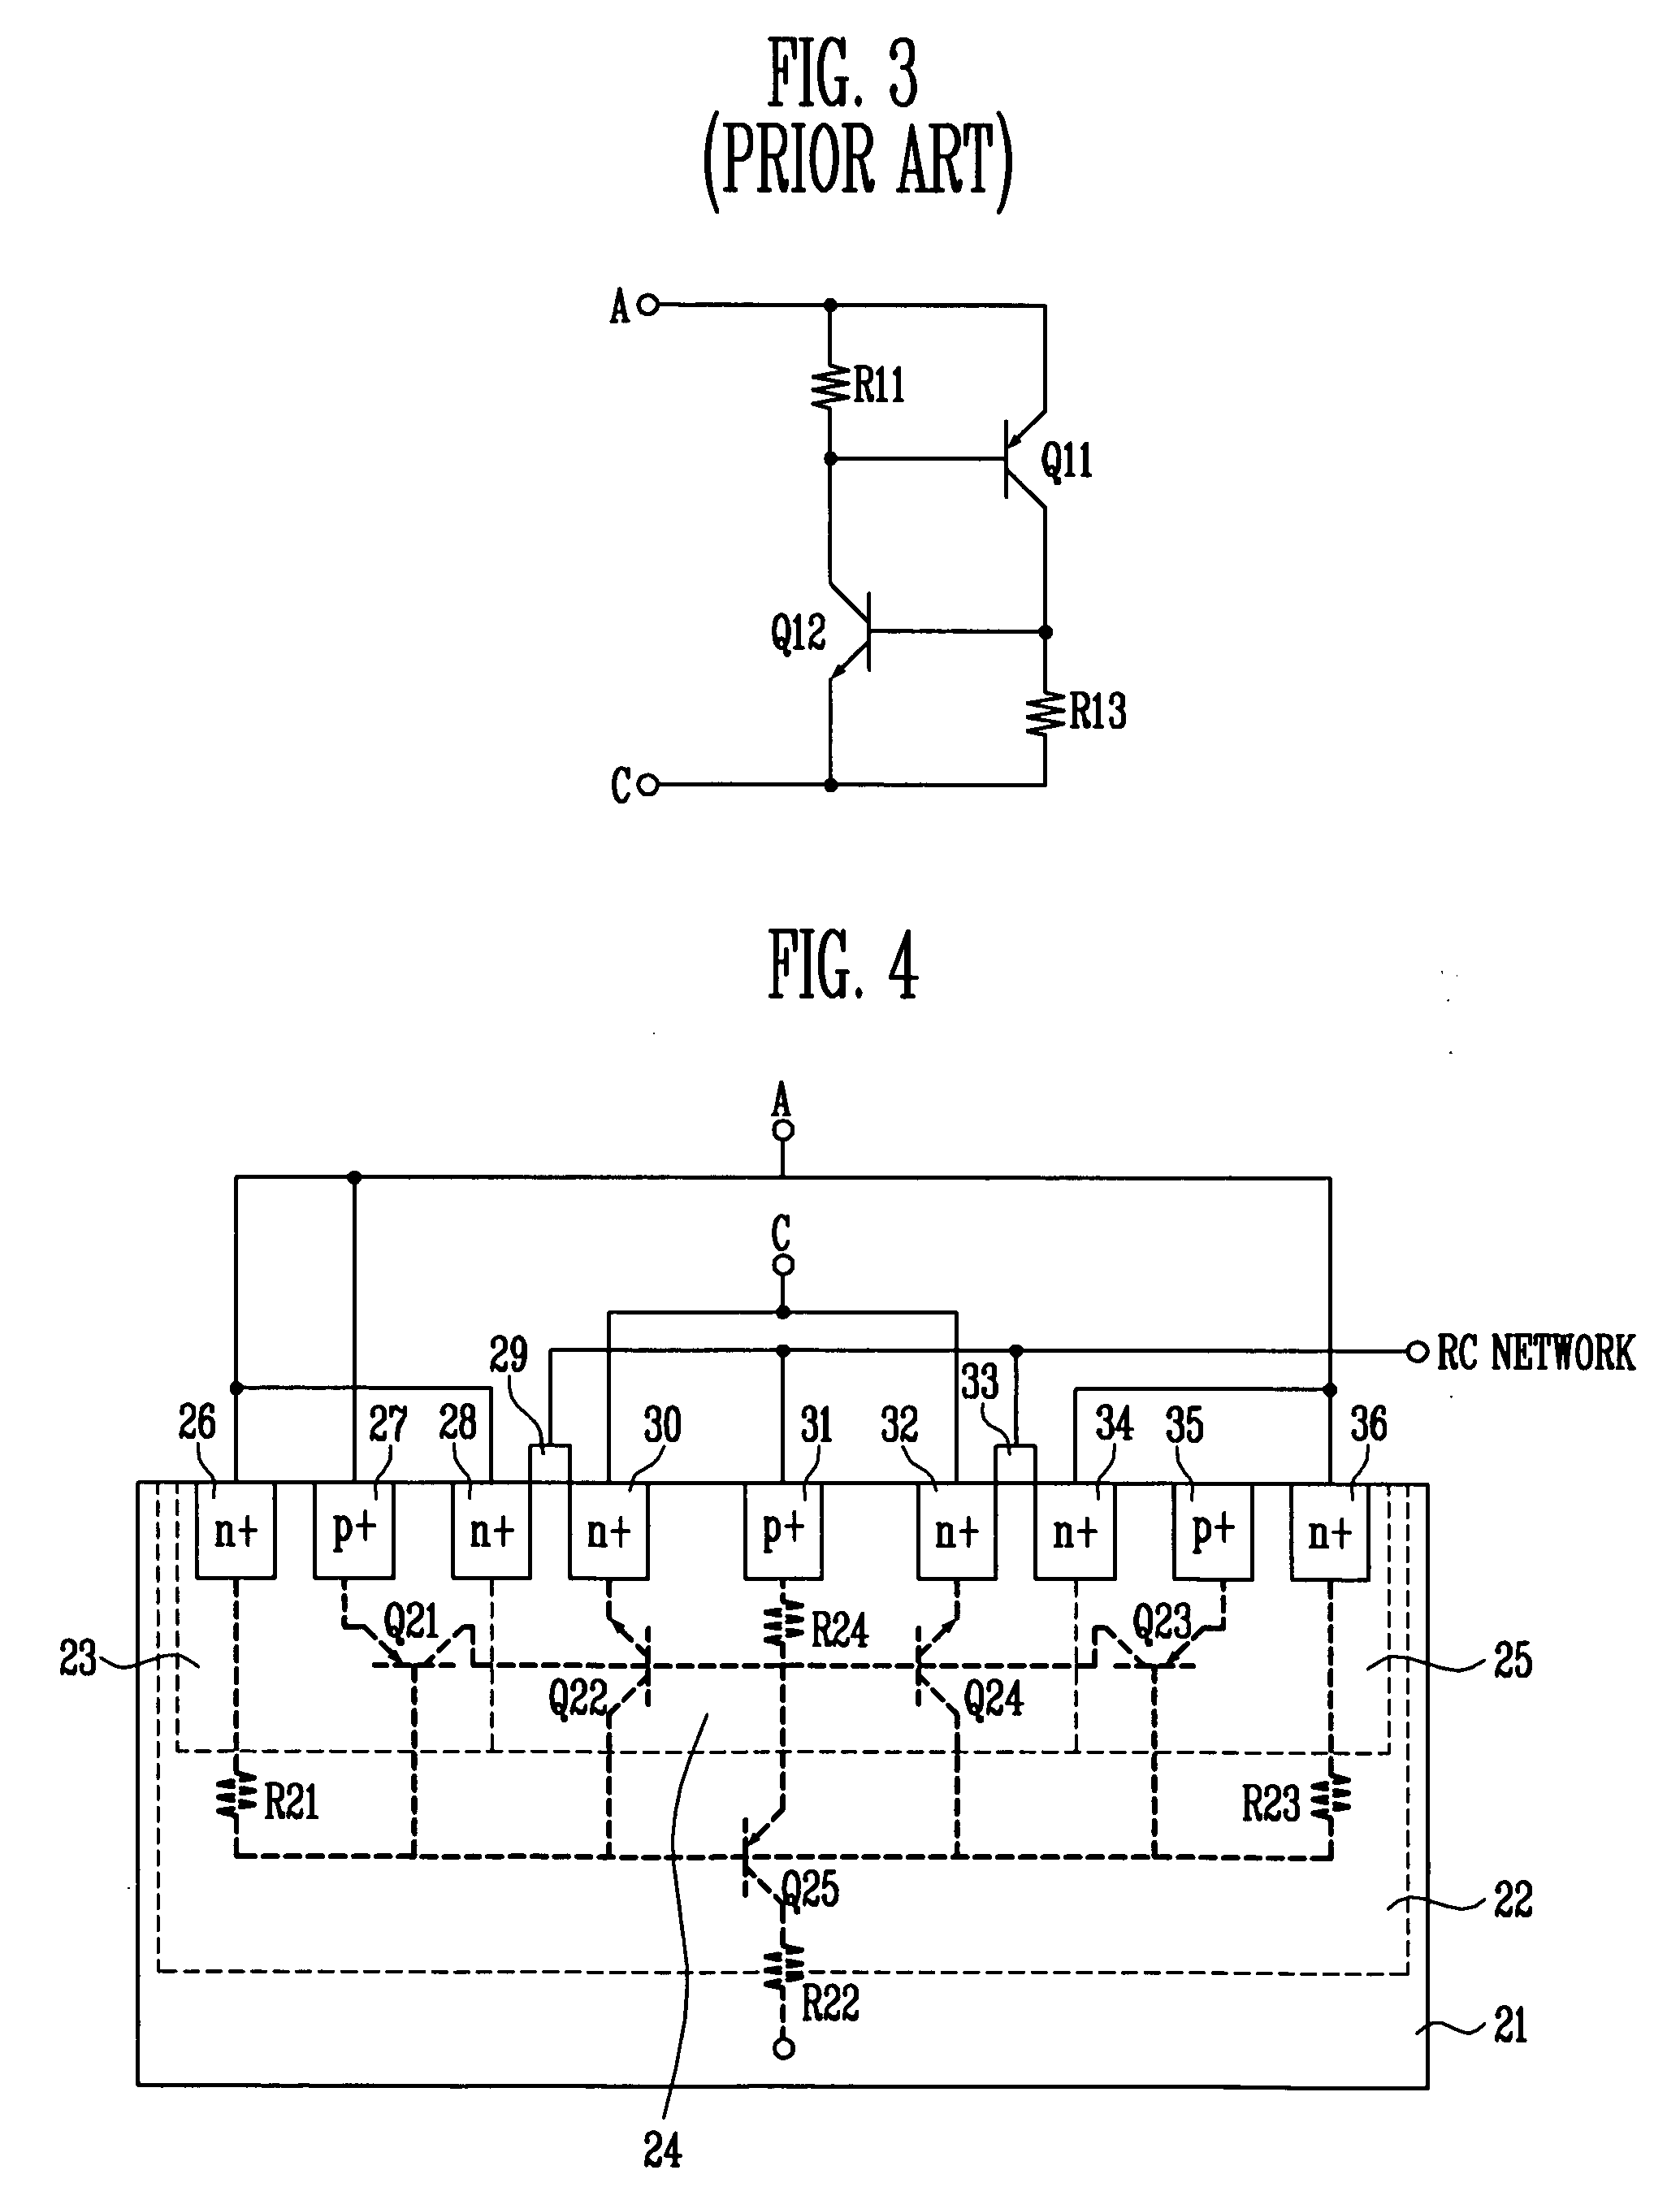 Electrostatic discharge protection circuit using triple welled silicon controlled rectifier